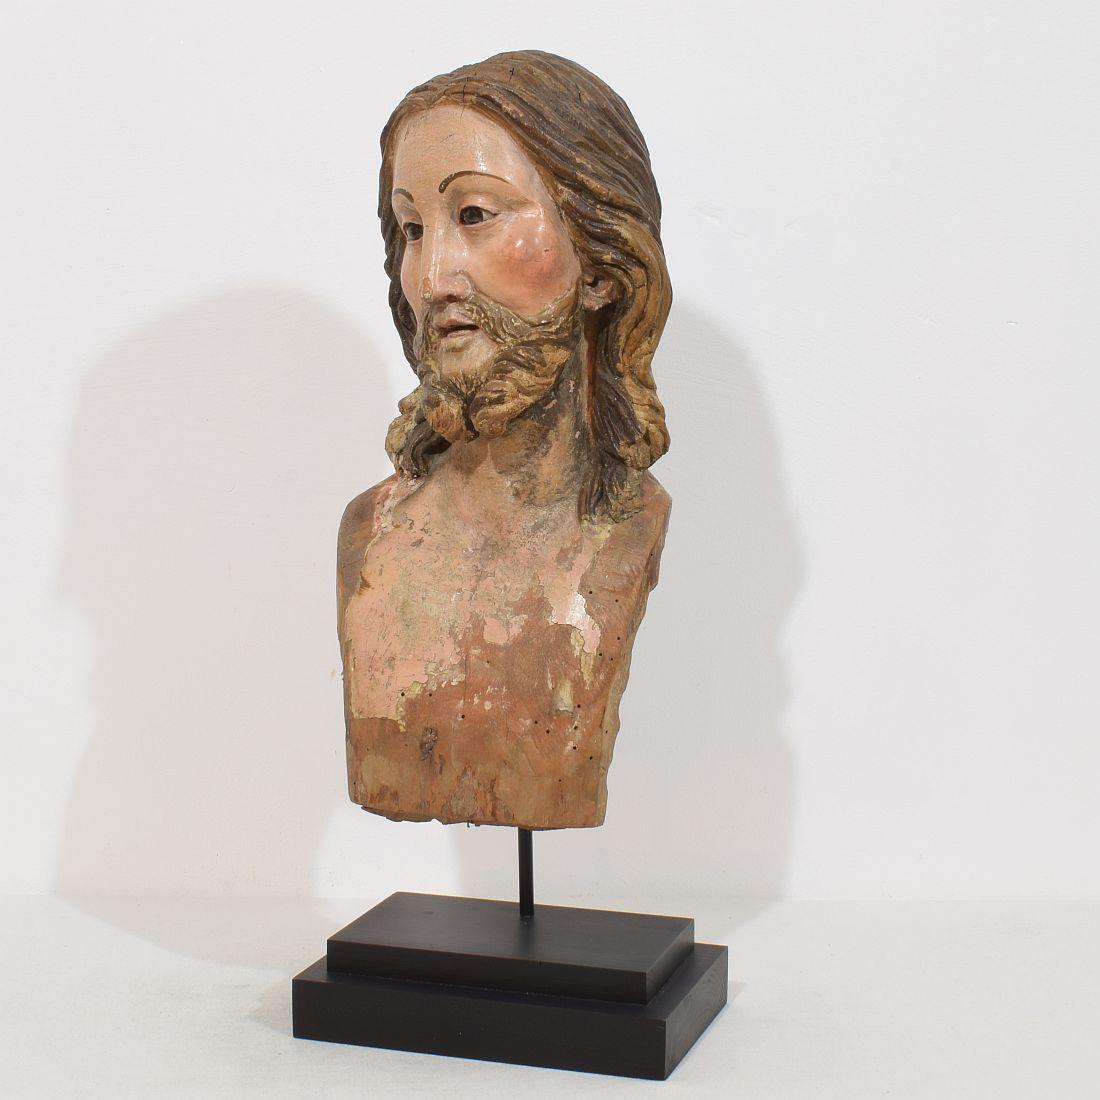 Unique handcarved wooden head of Christ with beautiful expression and glass eyes, once used at processions.
Napels/ Italy, circa 1750-1800. Beautiful example of 18th century craftsmanship. The head is beautiful carved then covered with chalk/gesso